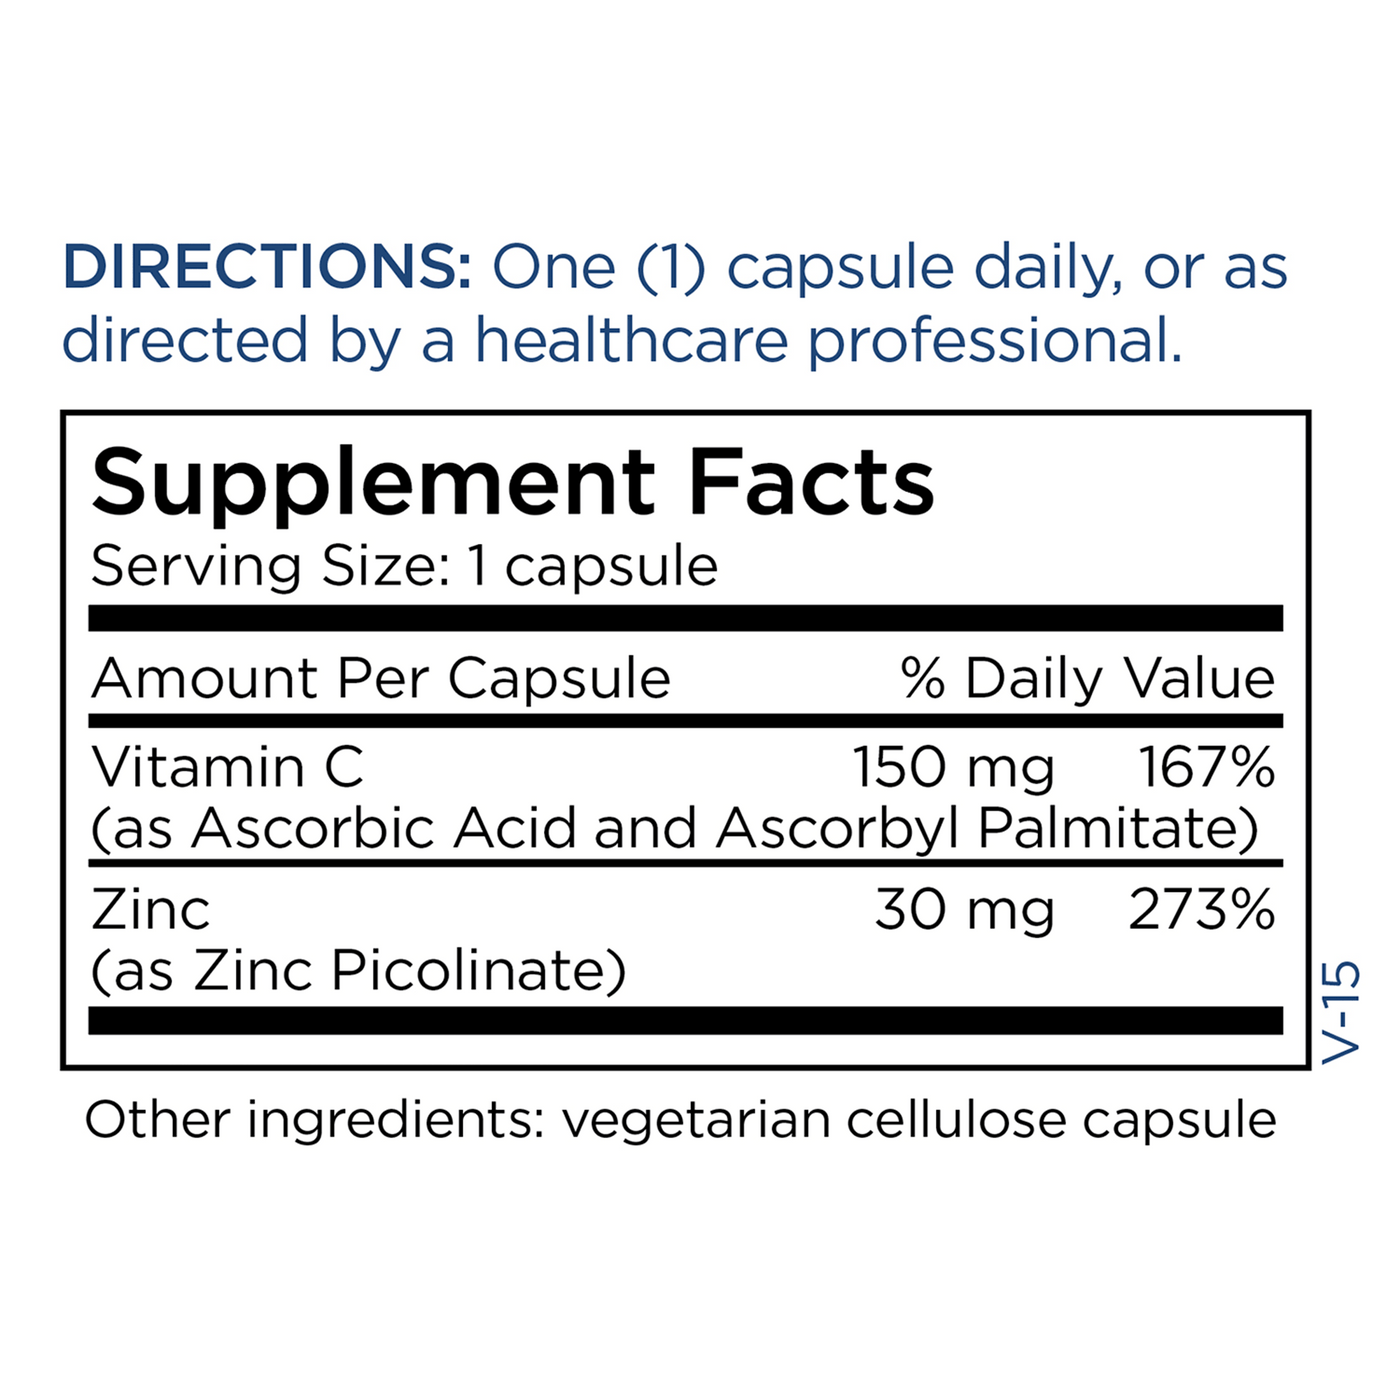 Zinc Picolinate 30 mg 90 caps Curated Wellness